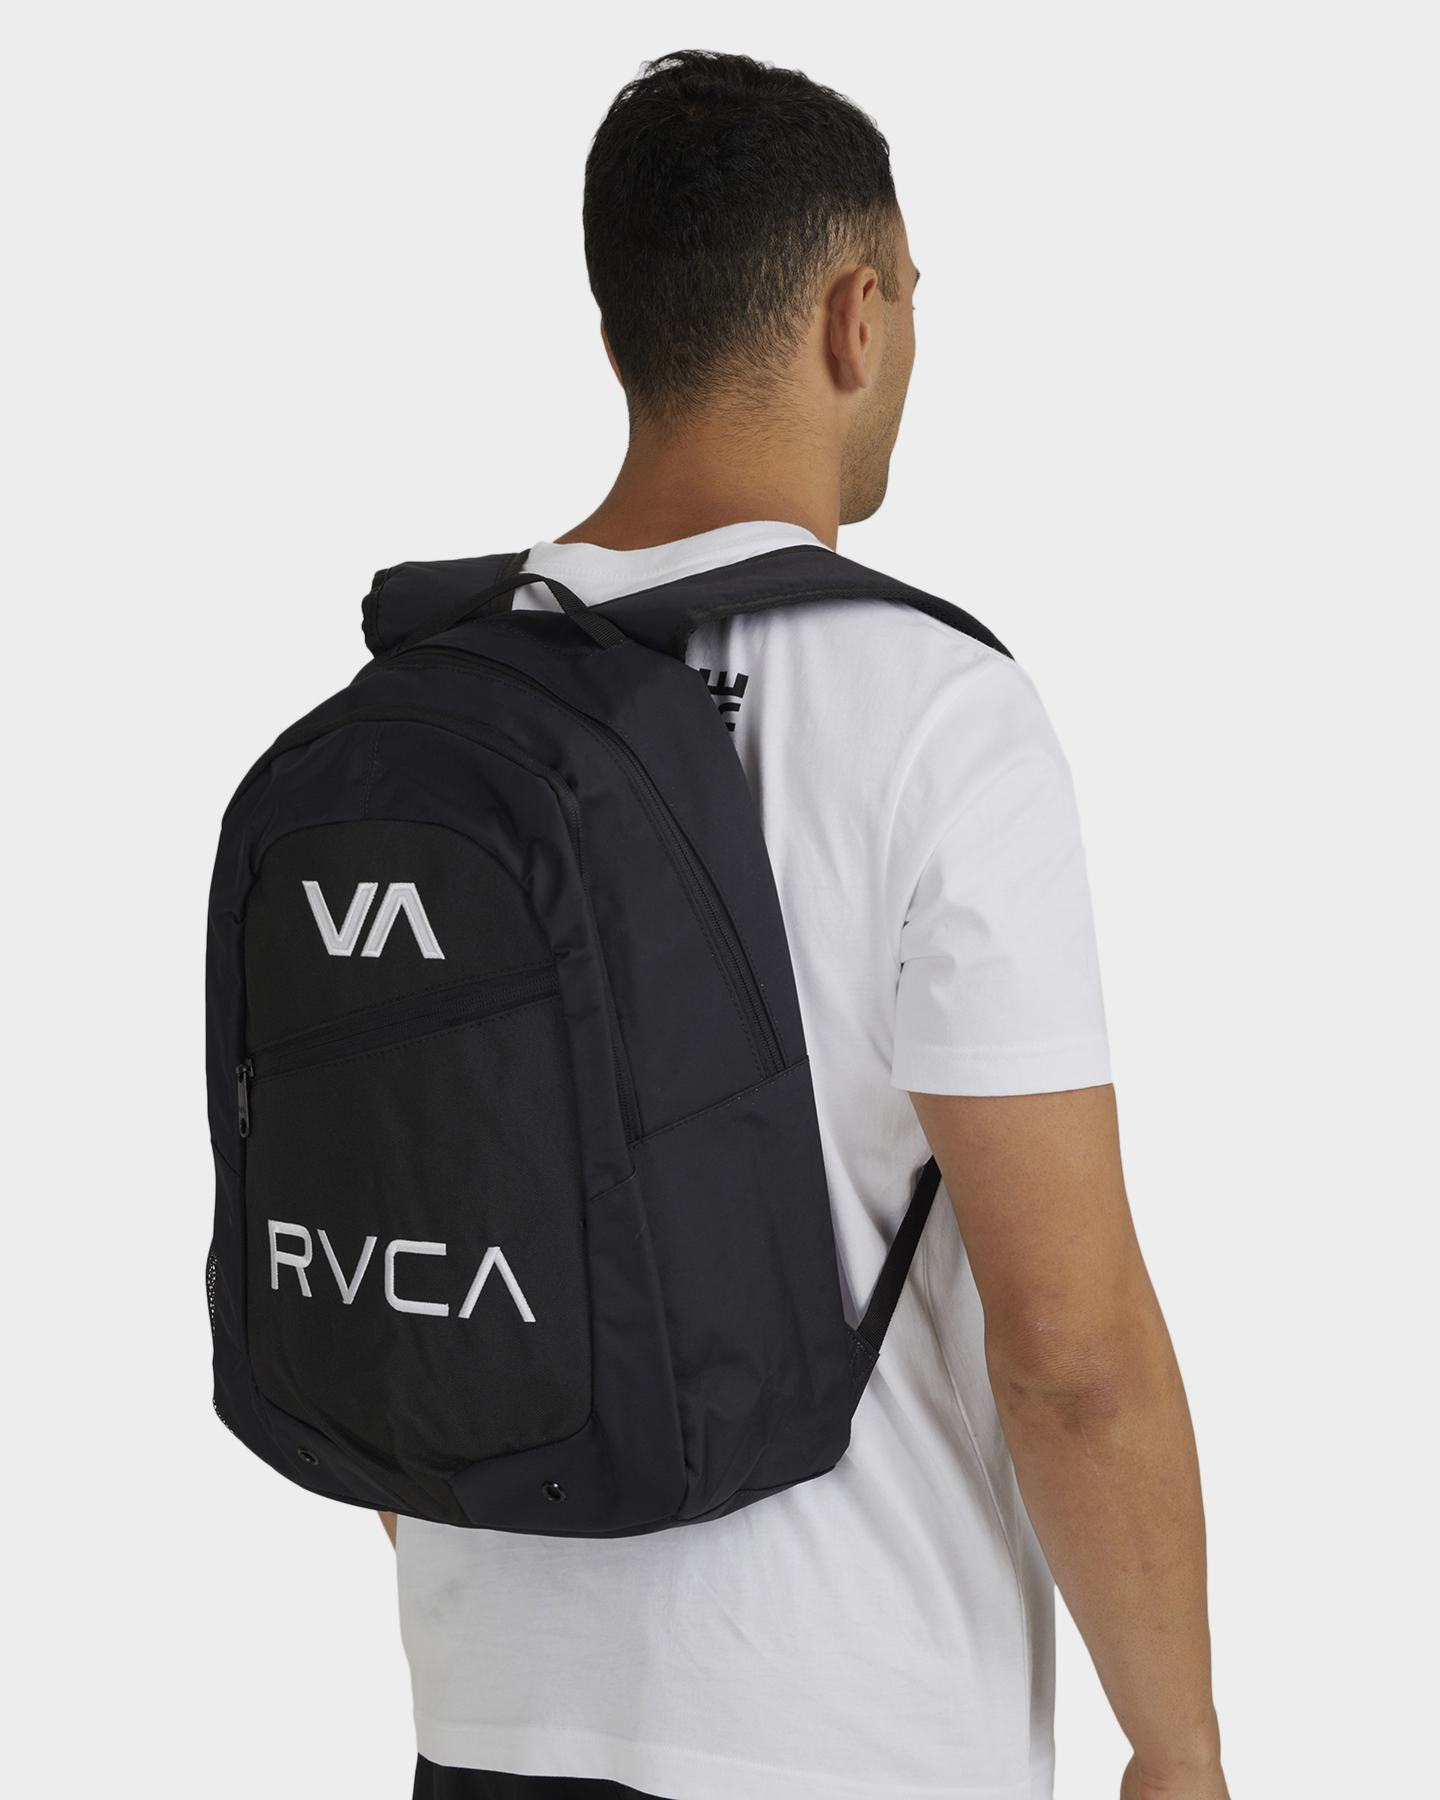 Rvca Rvca Pack Iv Backpack - Black | SurfStitch